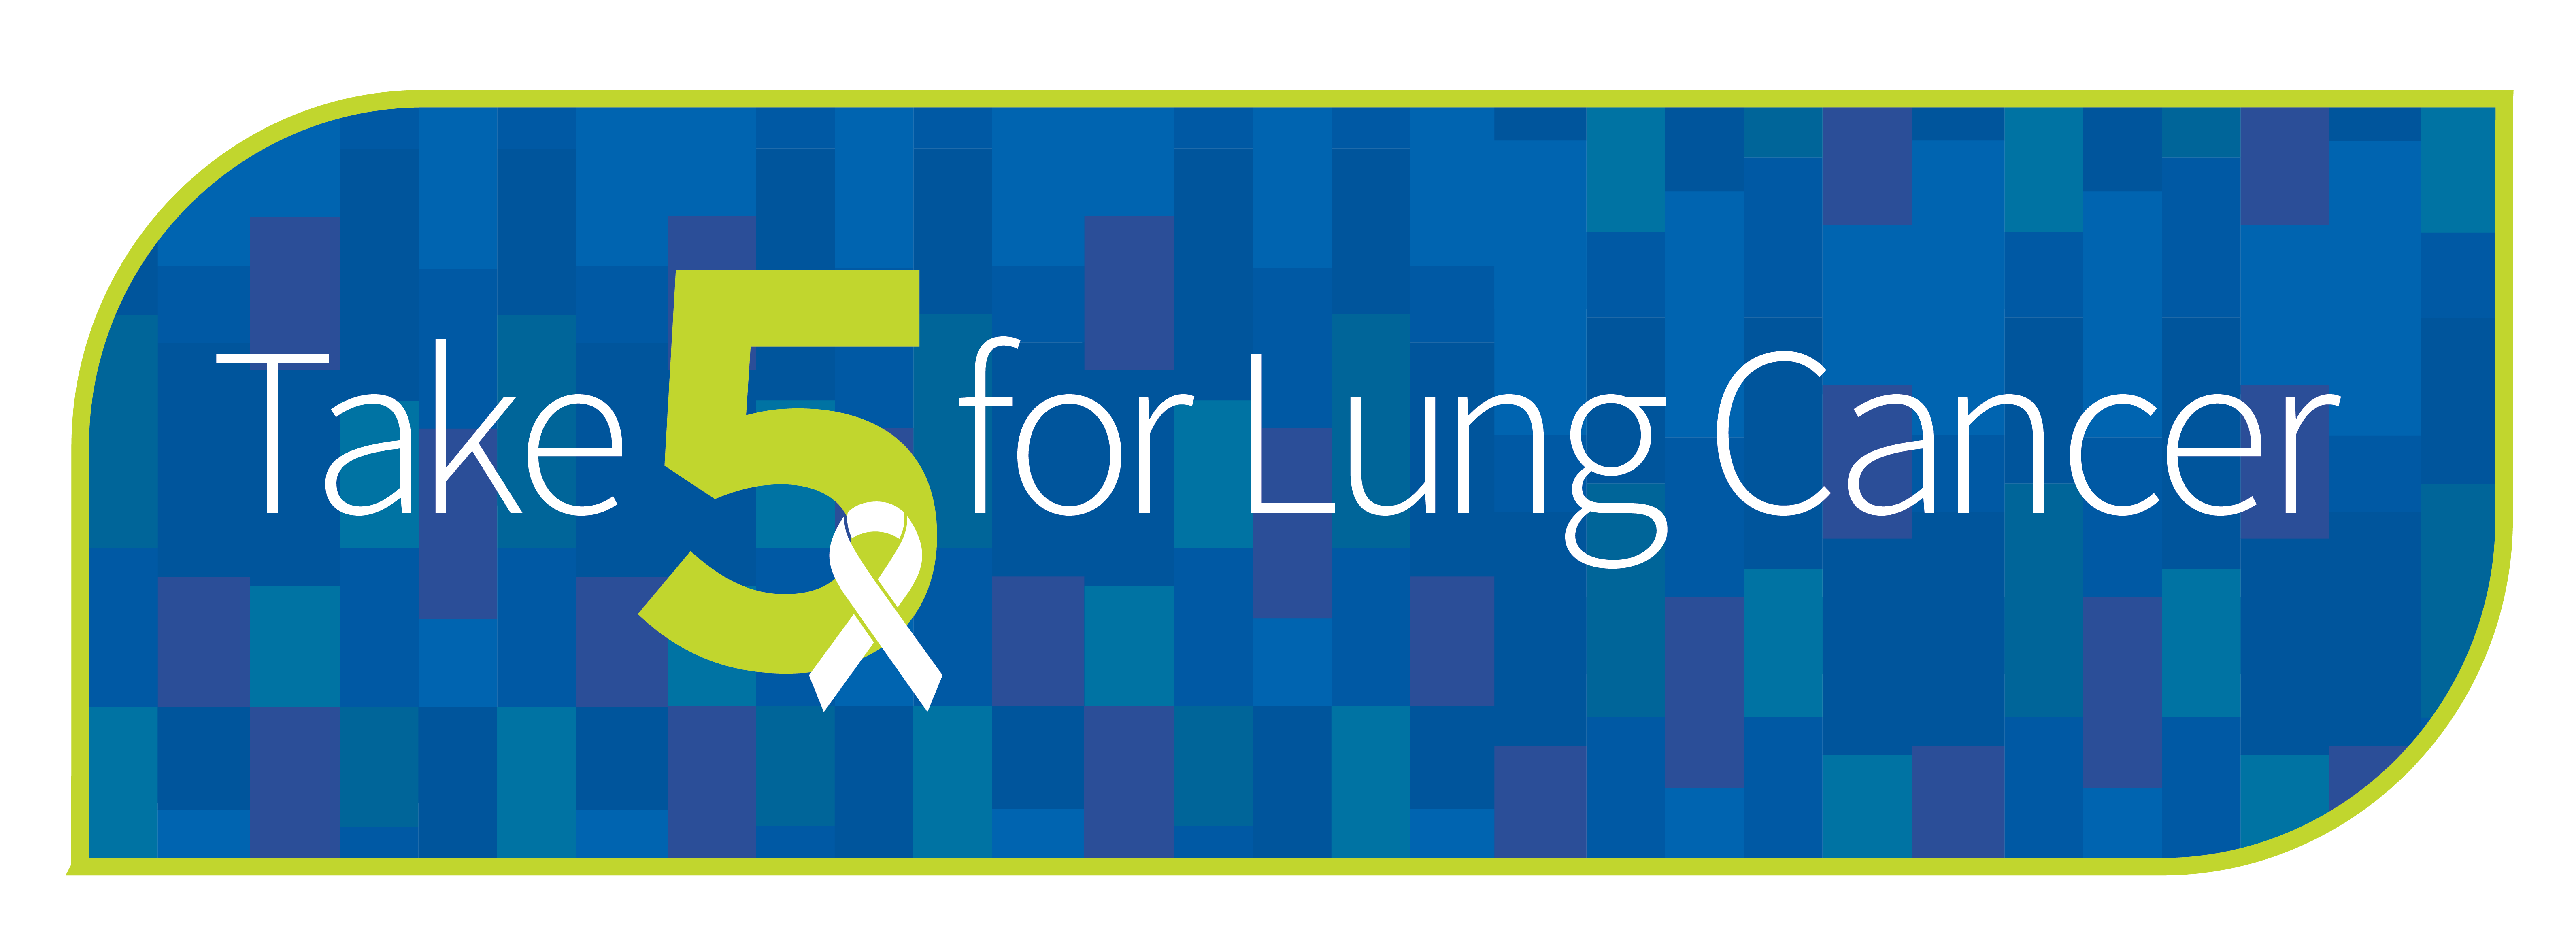 Take 5 for Lung Cancer